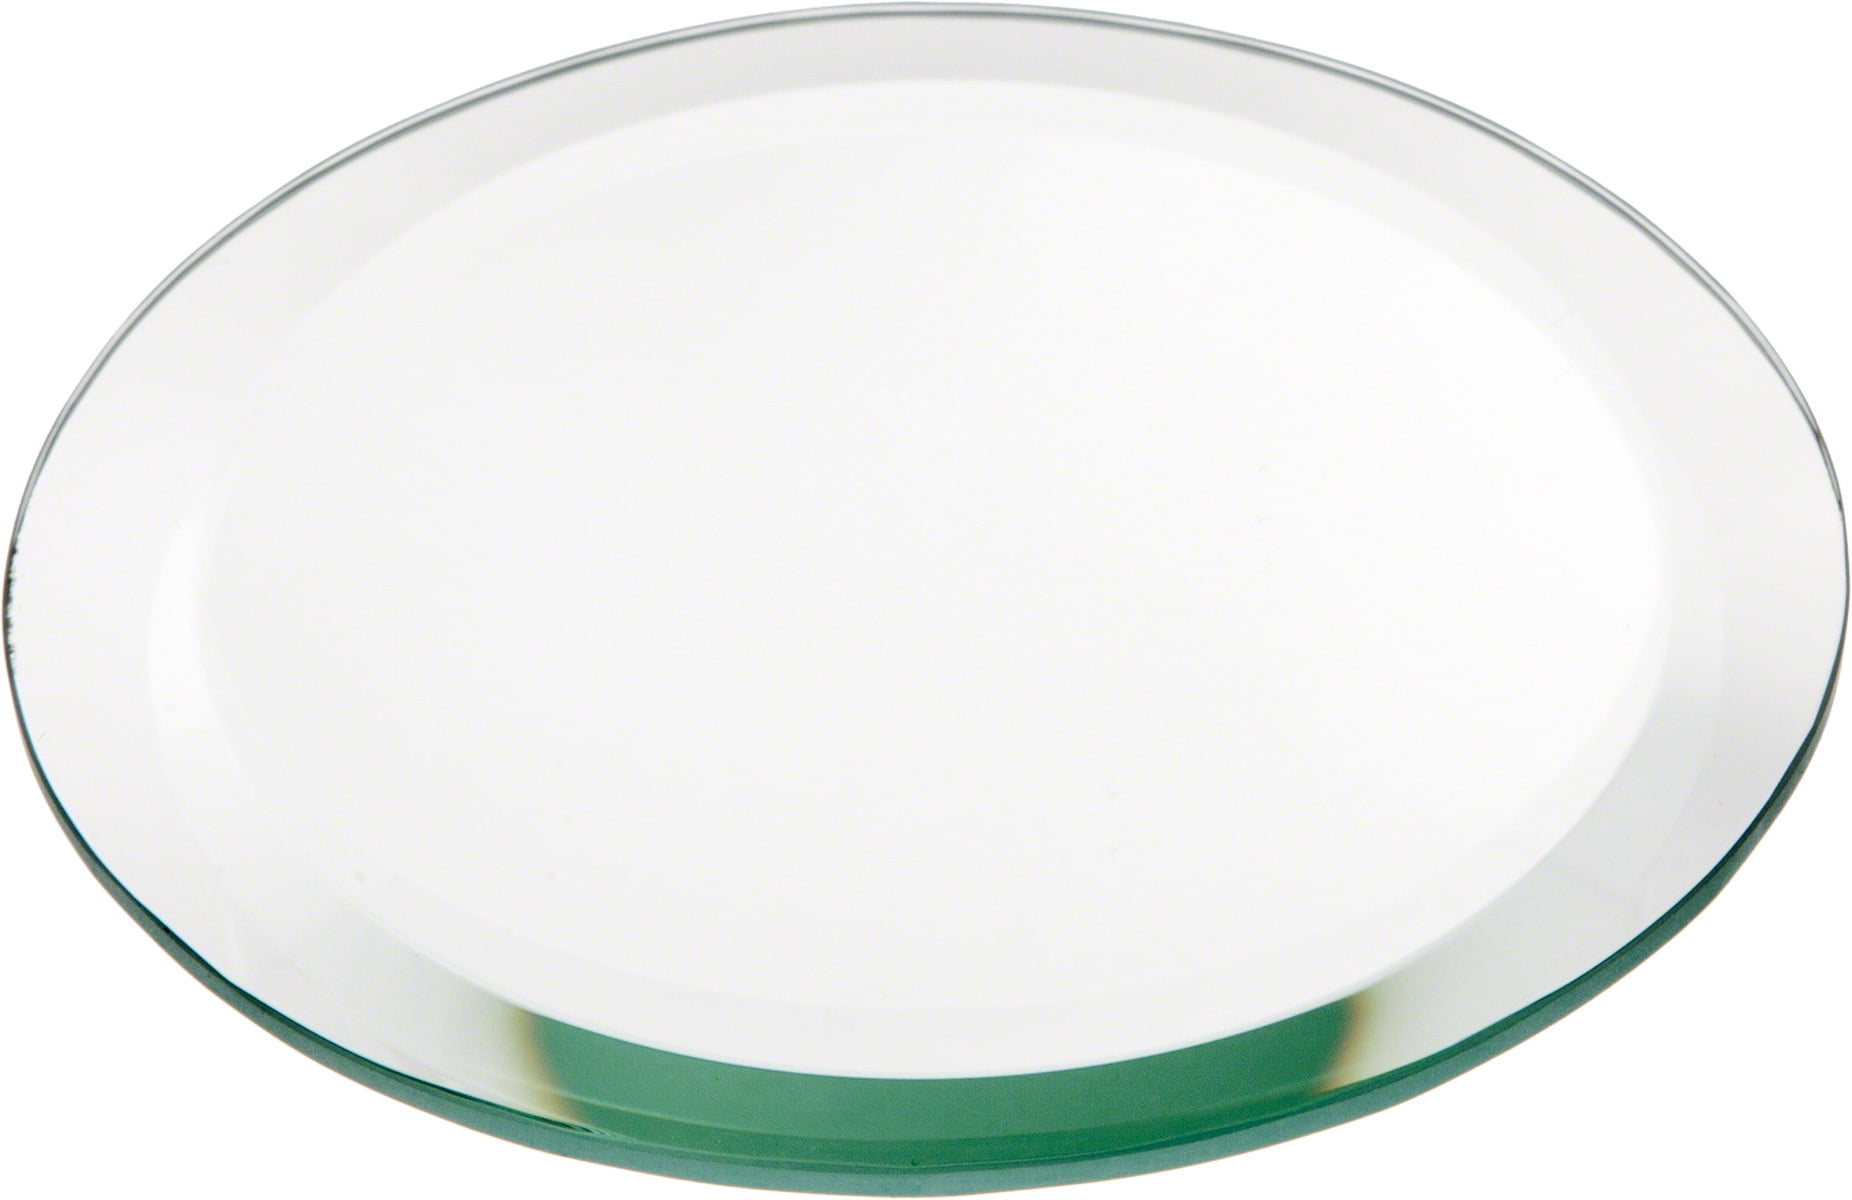 3 inch x 3 inch Plymor Round 5mm Beveled Glass Mirror Pack of 12 